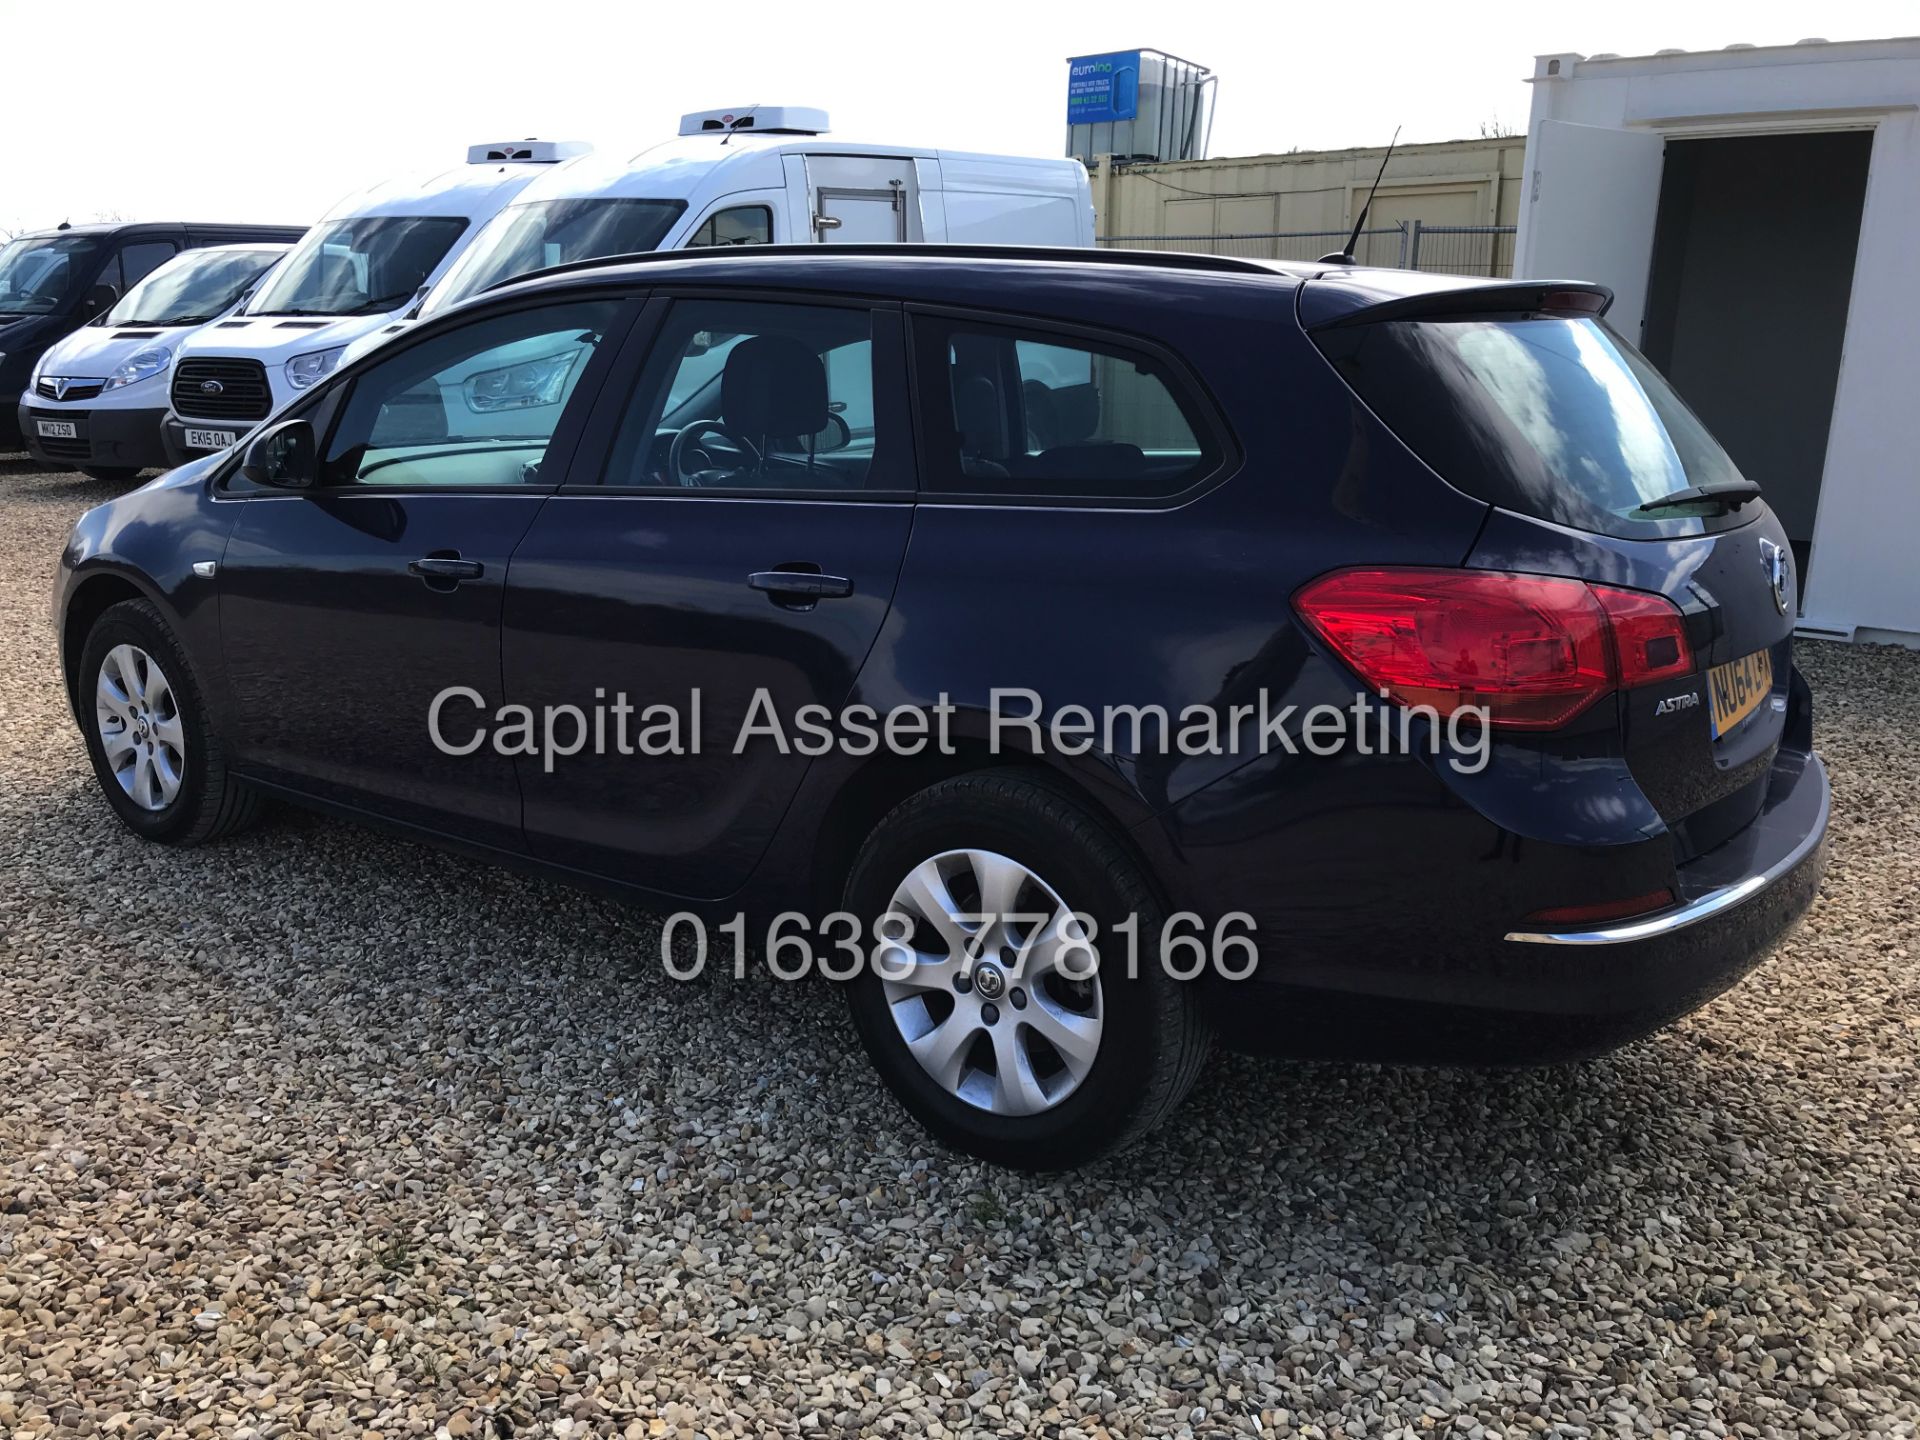 (ON SALE) VAUXHALL ASTRA 1.6CDTI "DESIGN" ESTATE (2015 MODEL) 1 OWNER FSH - AIR CON - CRUISE - Image 7 of 13